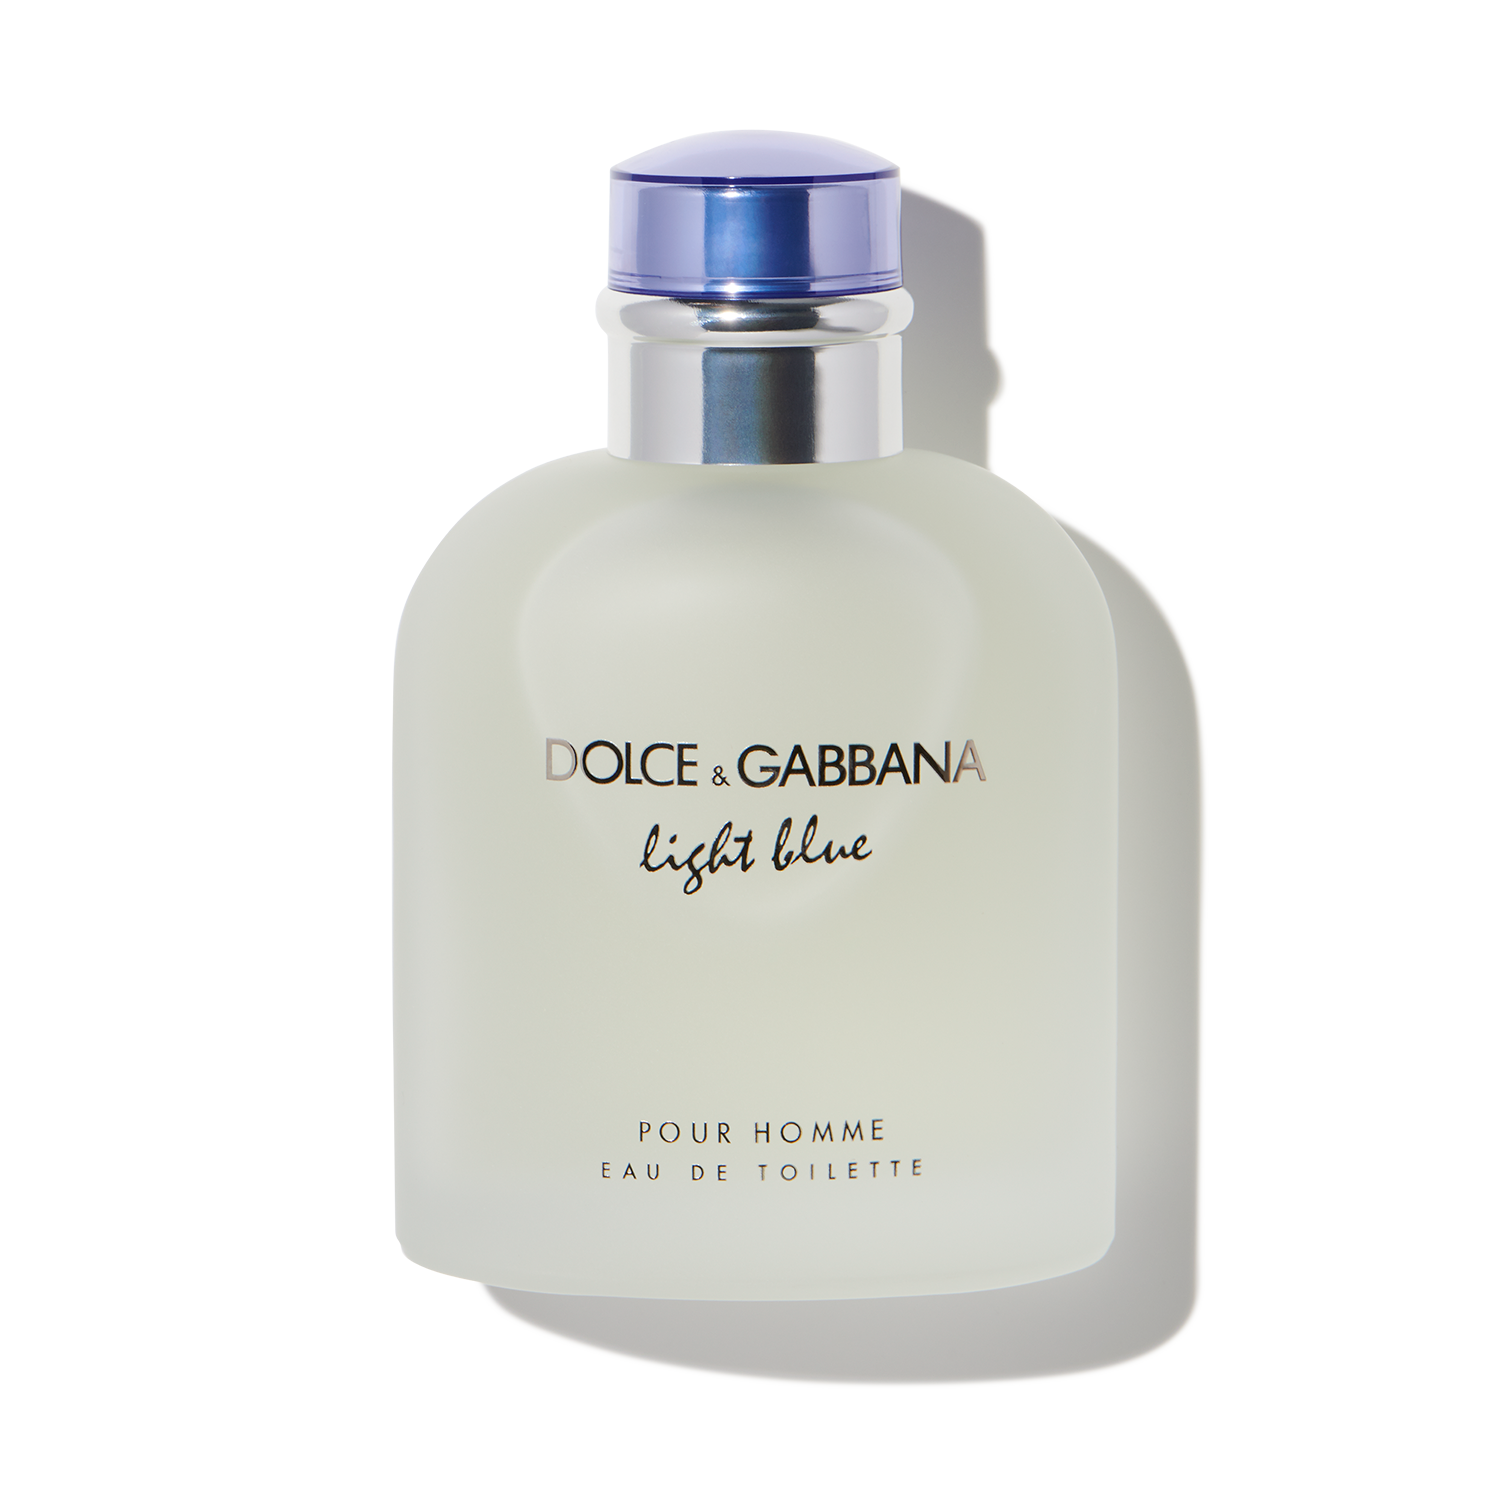 Betsy Trotwood Artista Pegajoso Dolce and Gabbana Cologne | Dolce Gabbana Light Blue Men